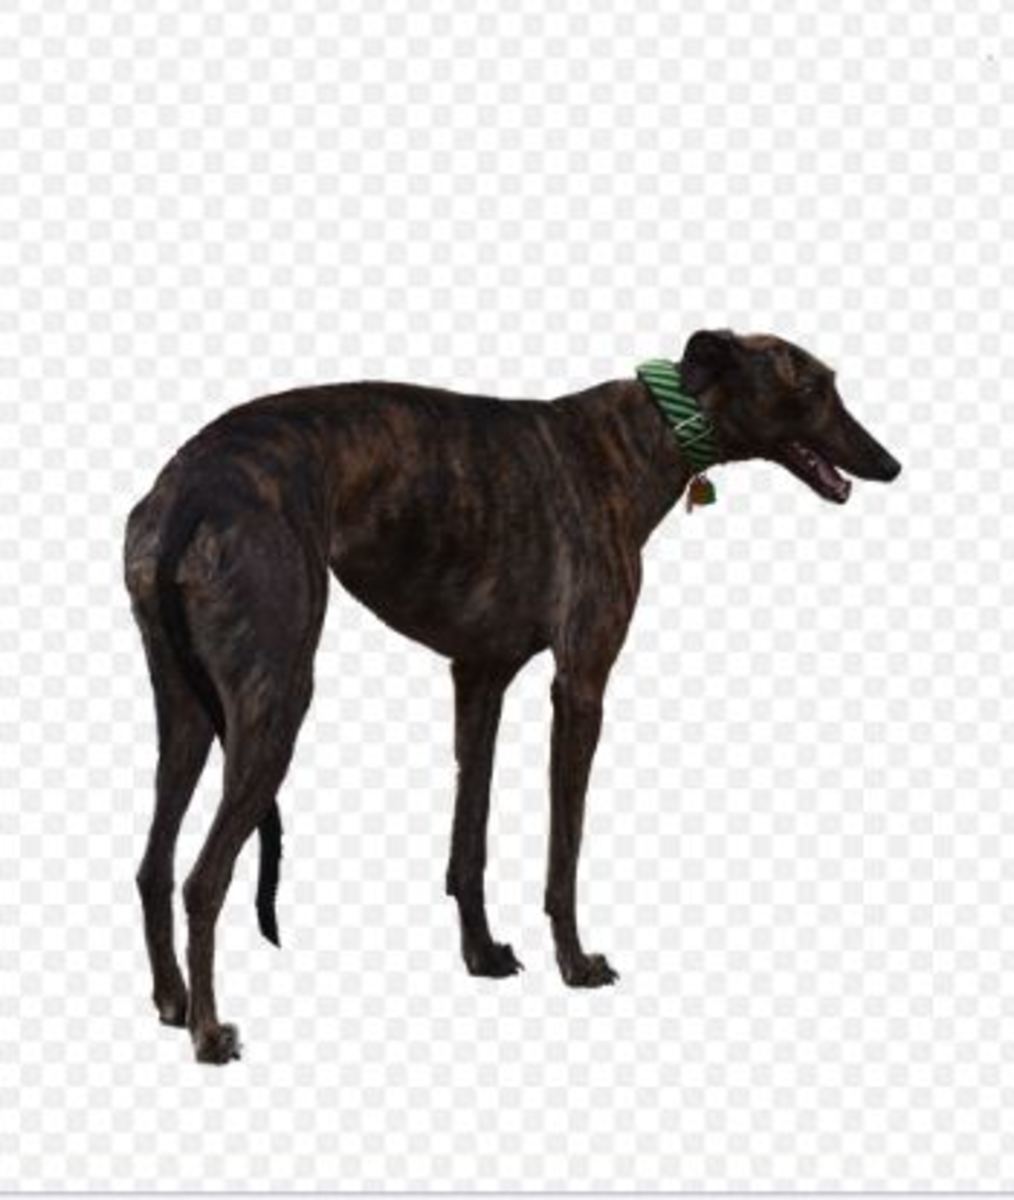  The greyhound has a natural low tail carriage.